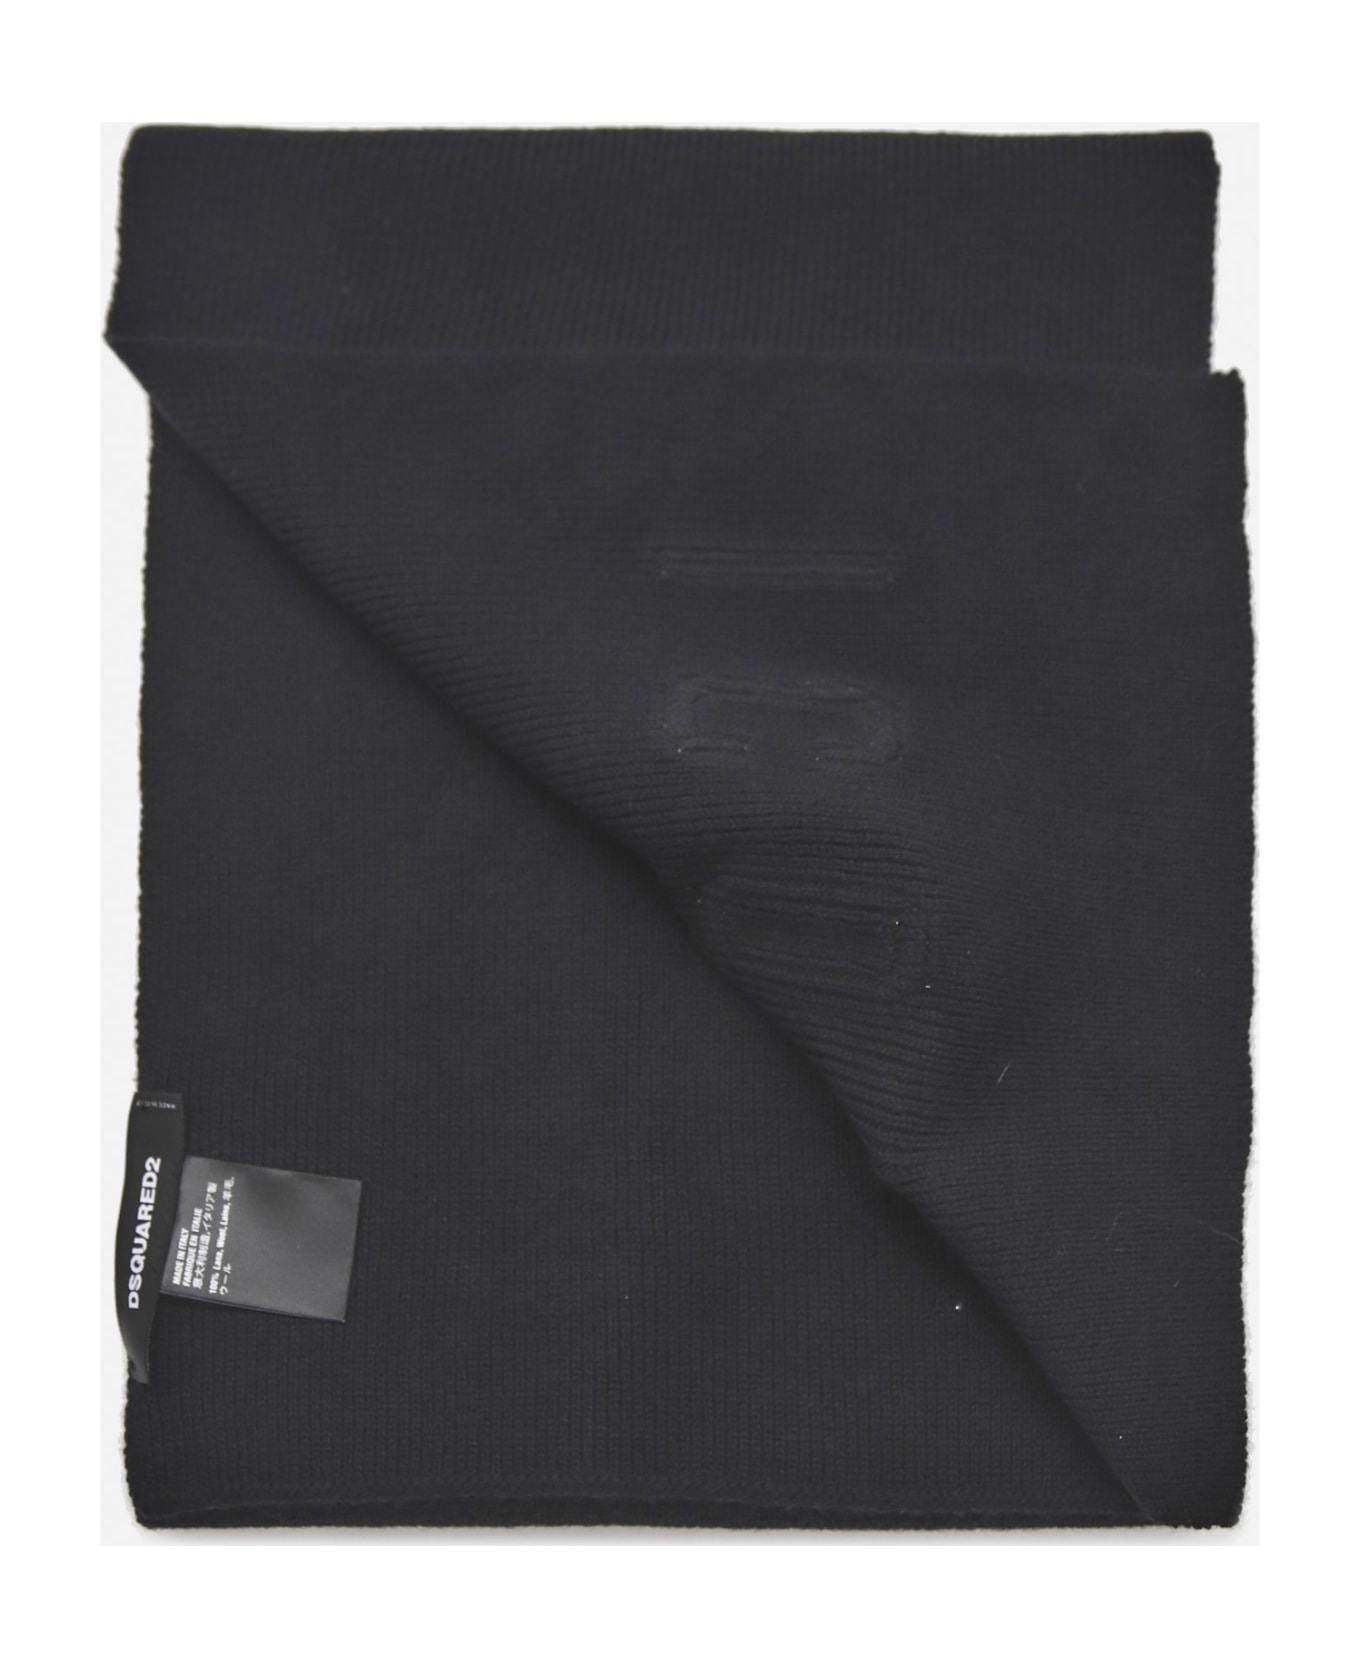 Dsquared2 Wool Scarf With Contrasting Embroidered Logo - Black